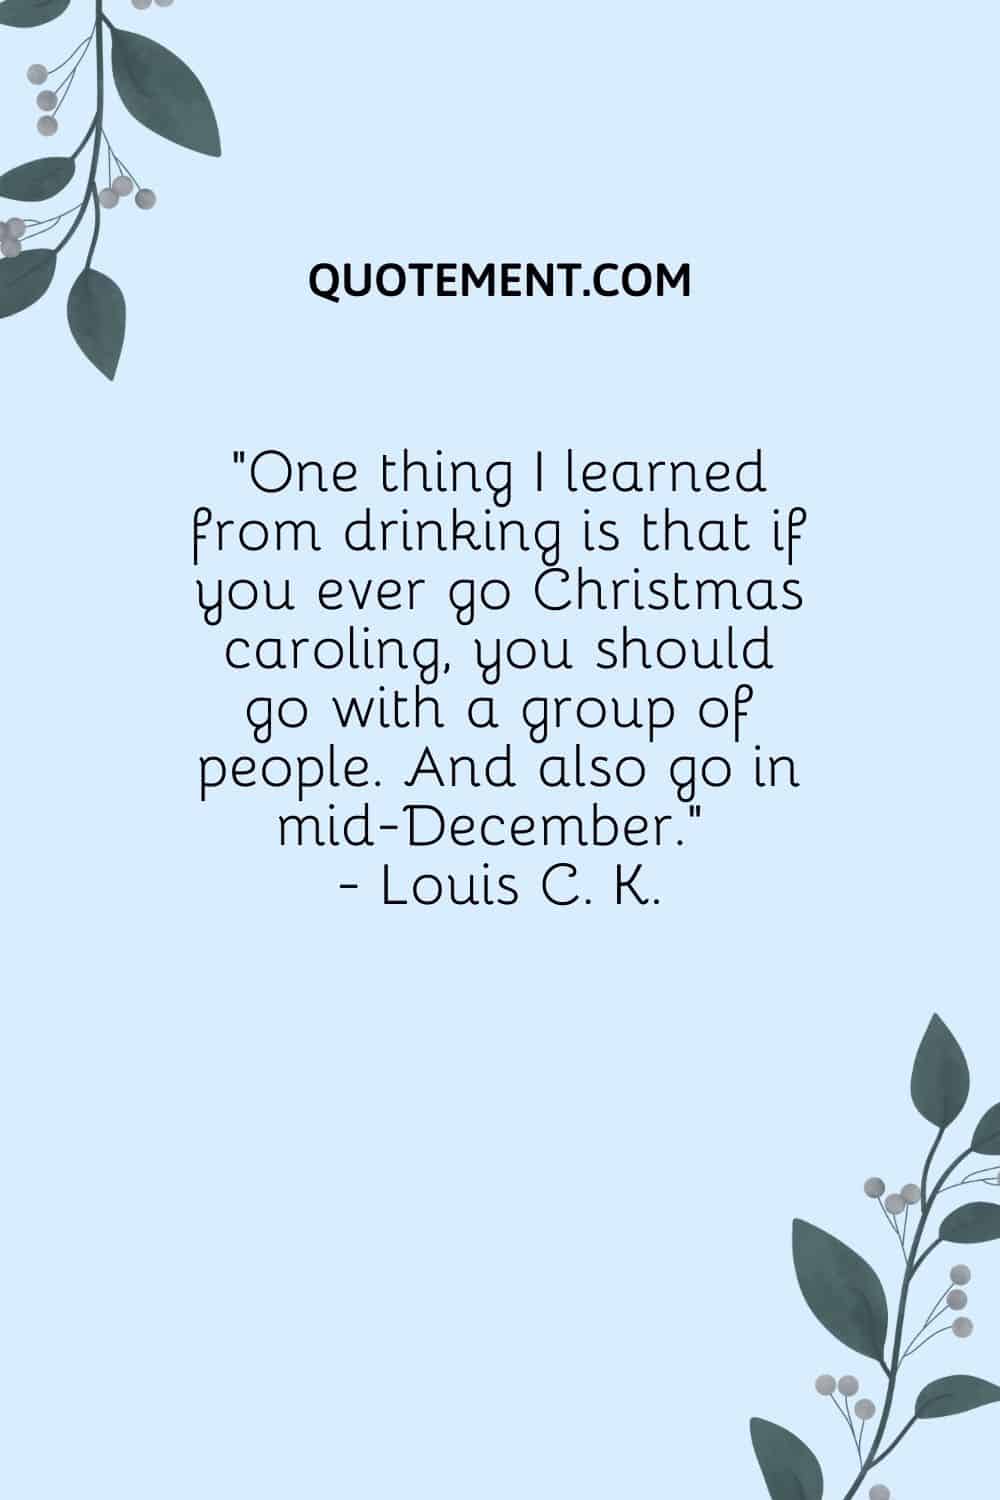 “One thing I learned from drinking is that if you ever go Christmas caroling, you should go with a group of people. And also go in mid-December.” — Louis C. K.